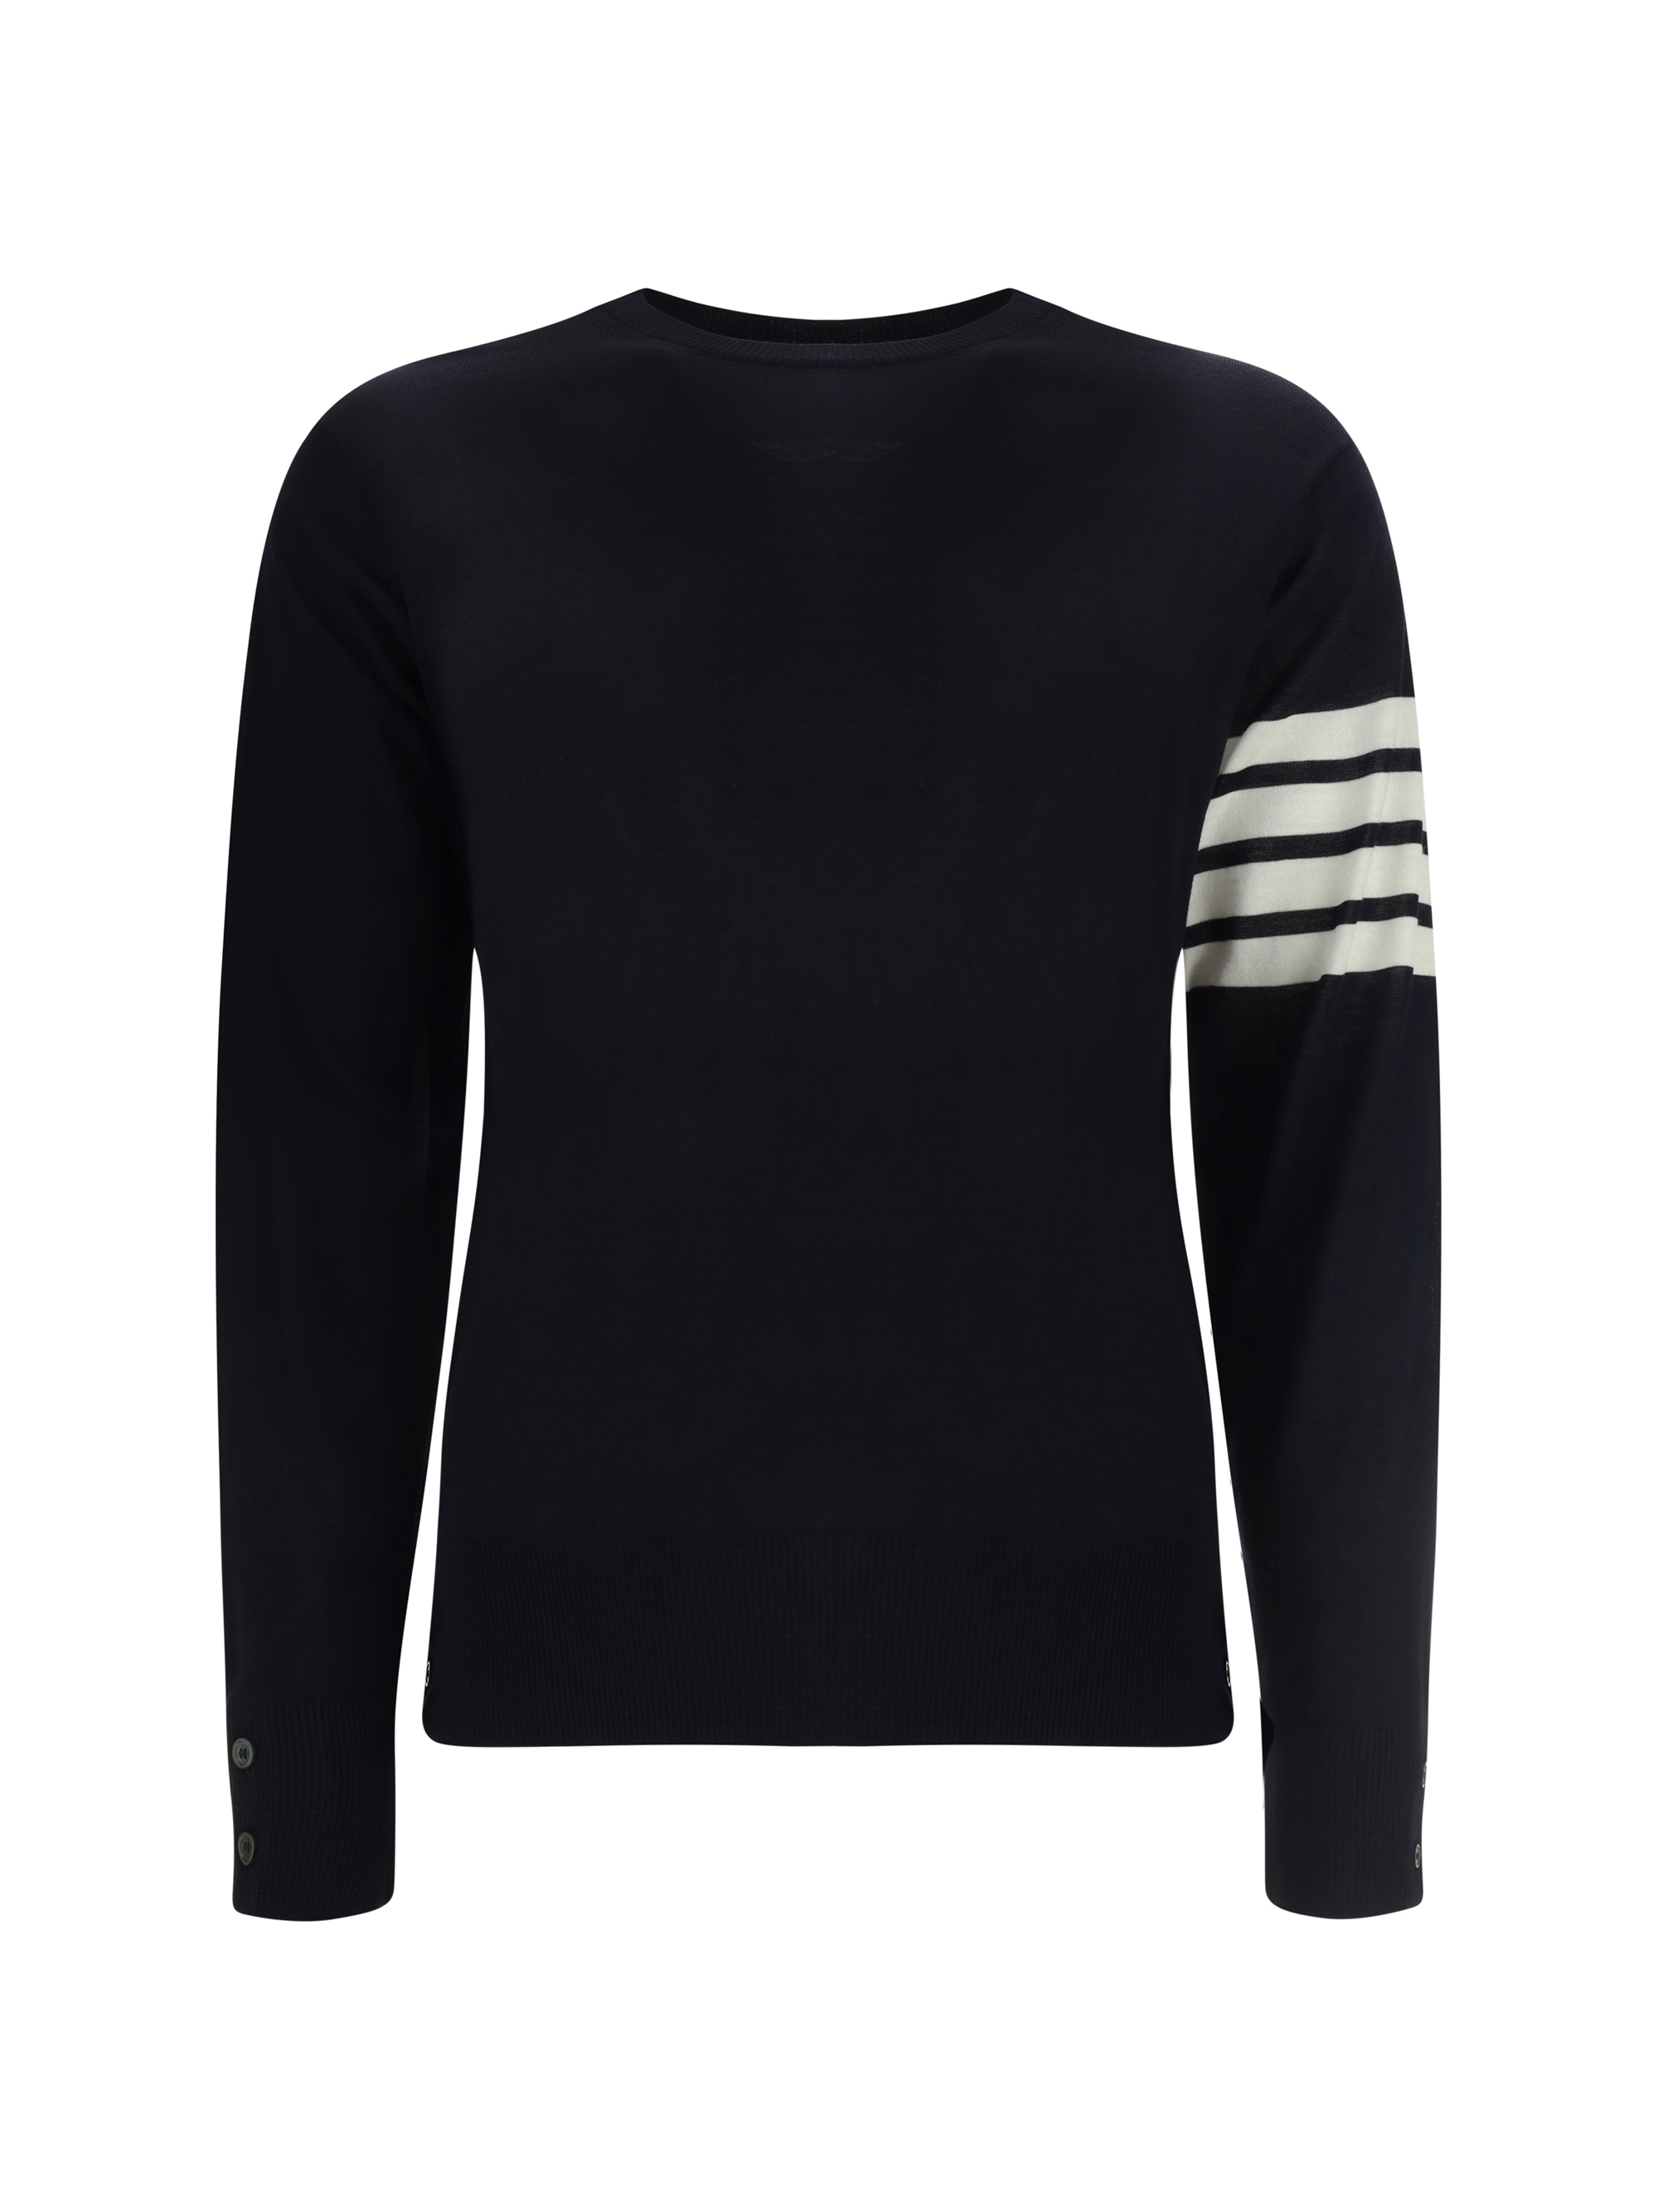 Thom Browne Sweater In Navy